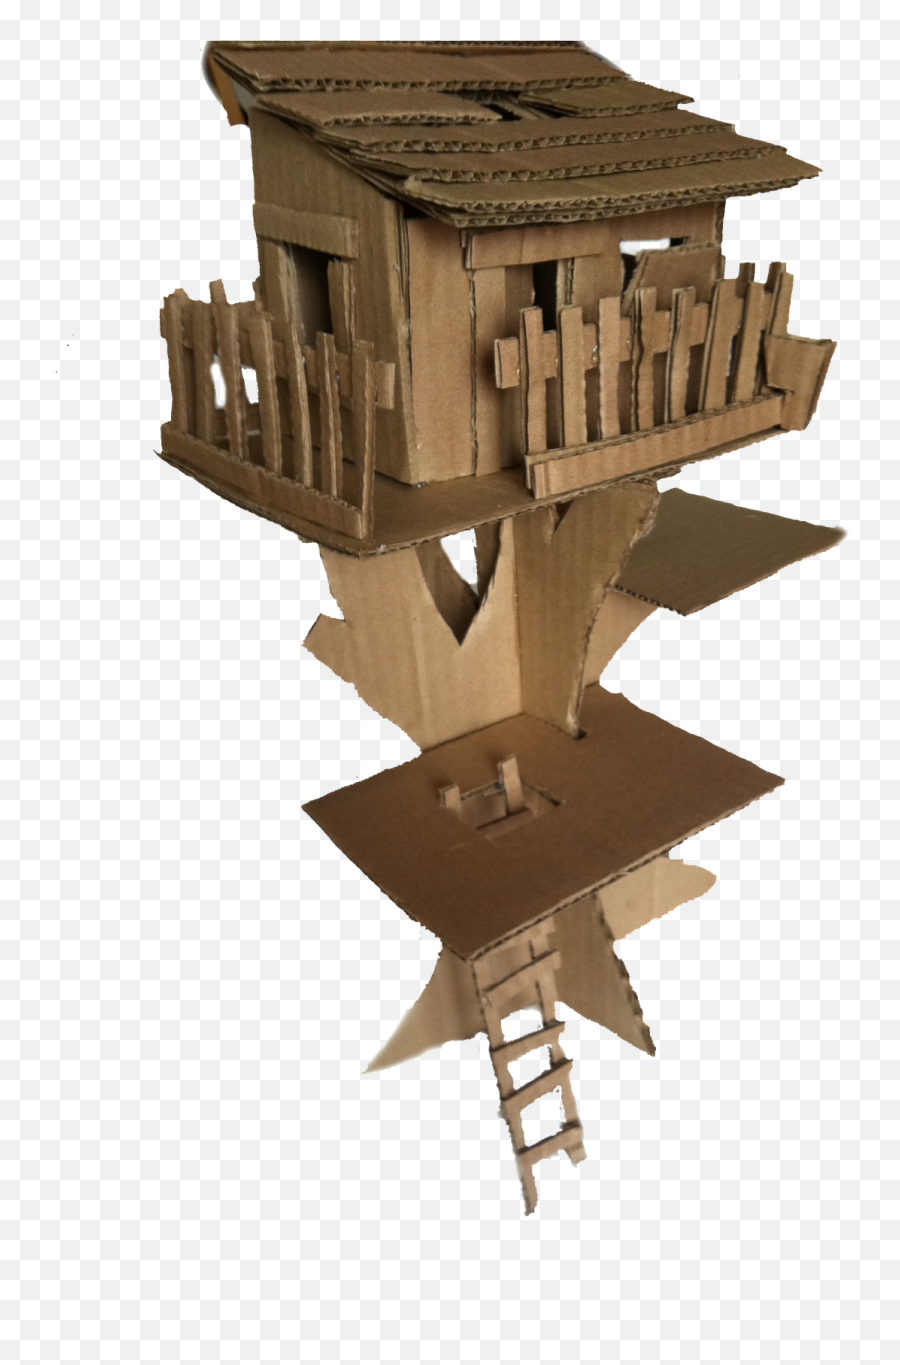 My Tree House - Cardboard Tree House Model Png,Treehouse Png